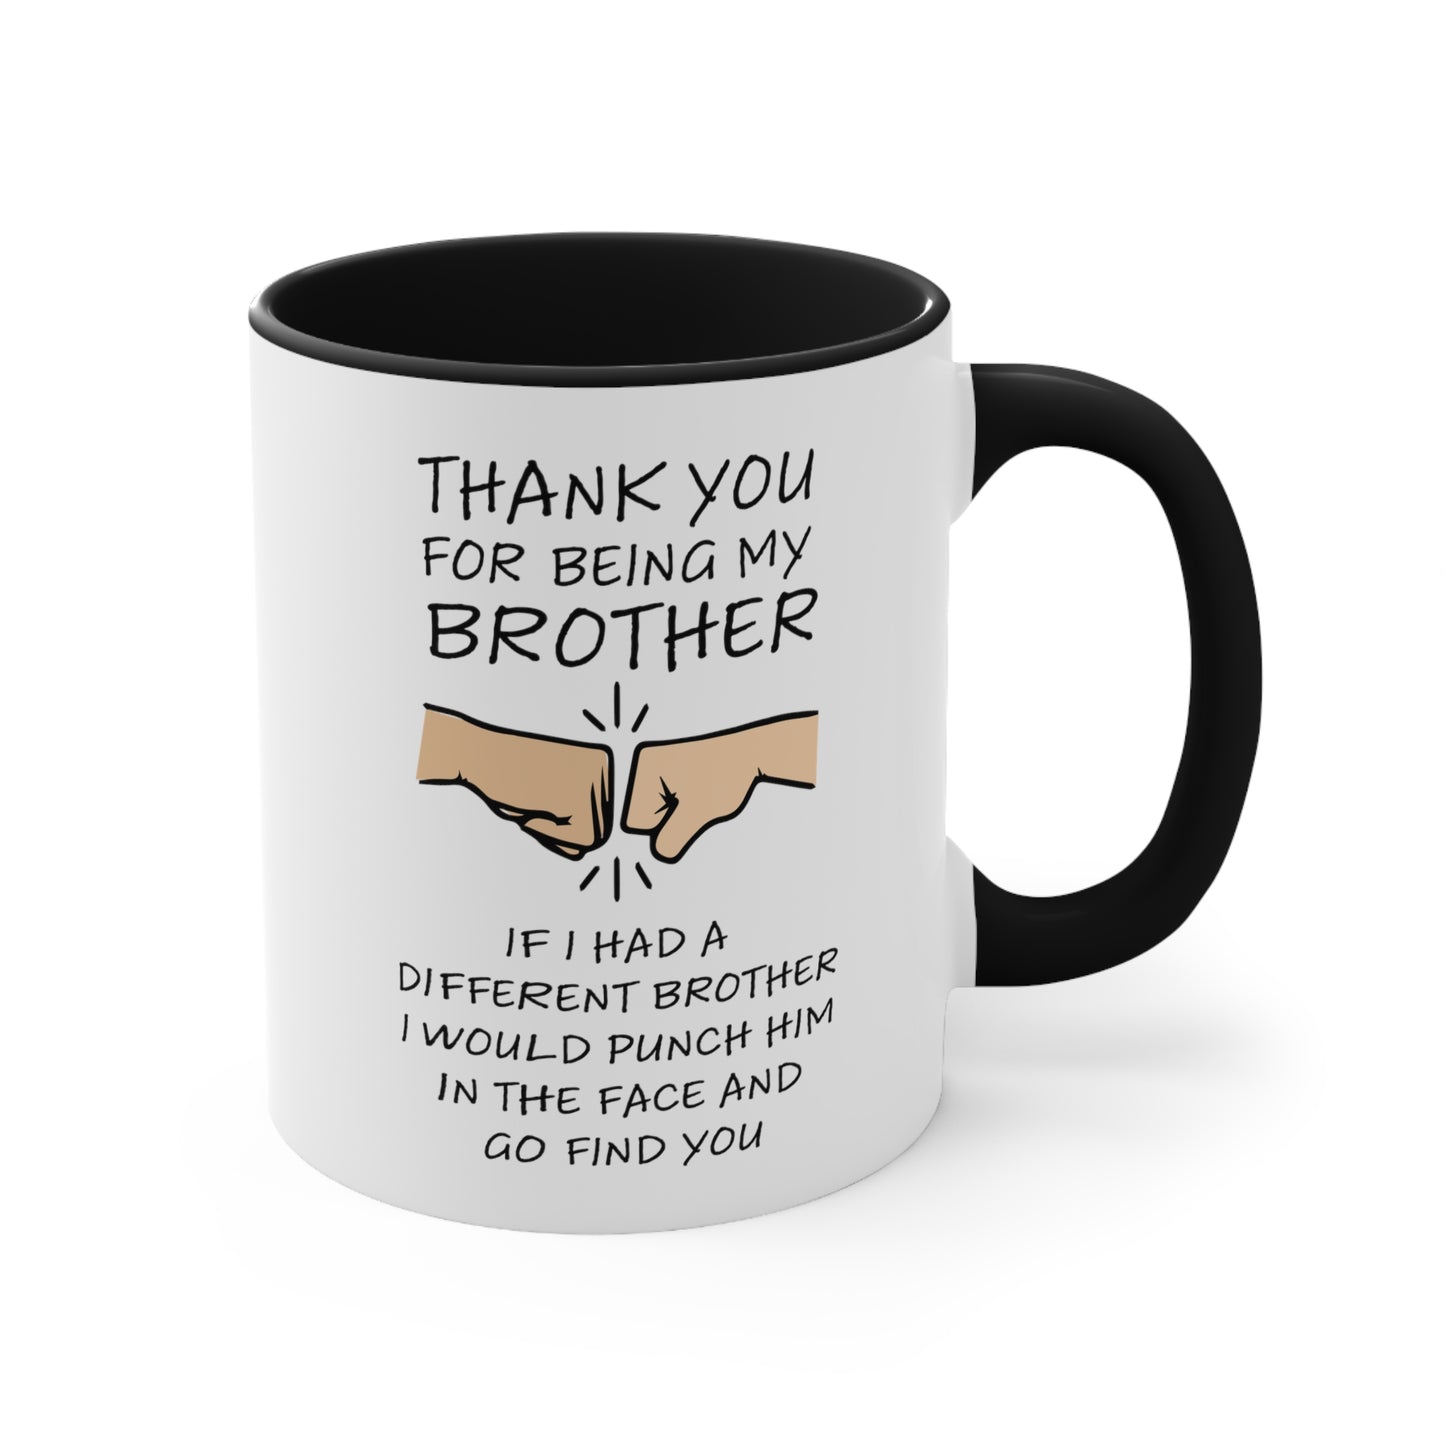 THANKS FOR BEING MY BROTHER MUG